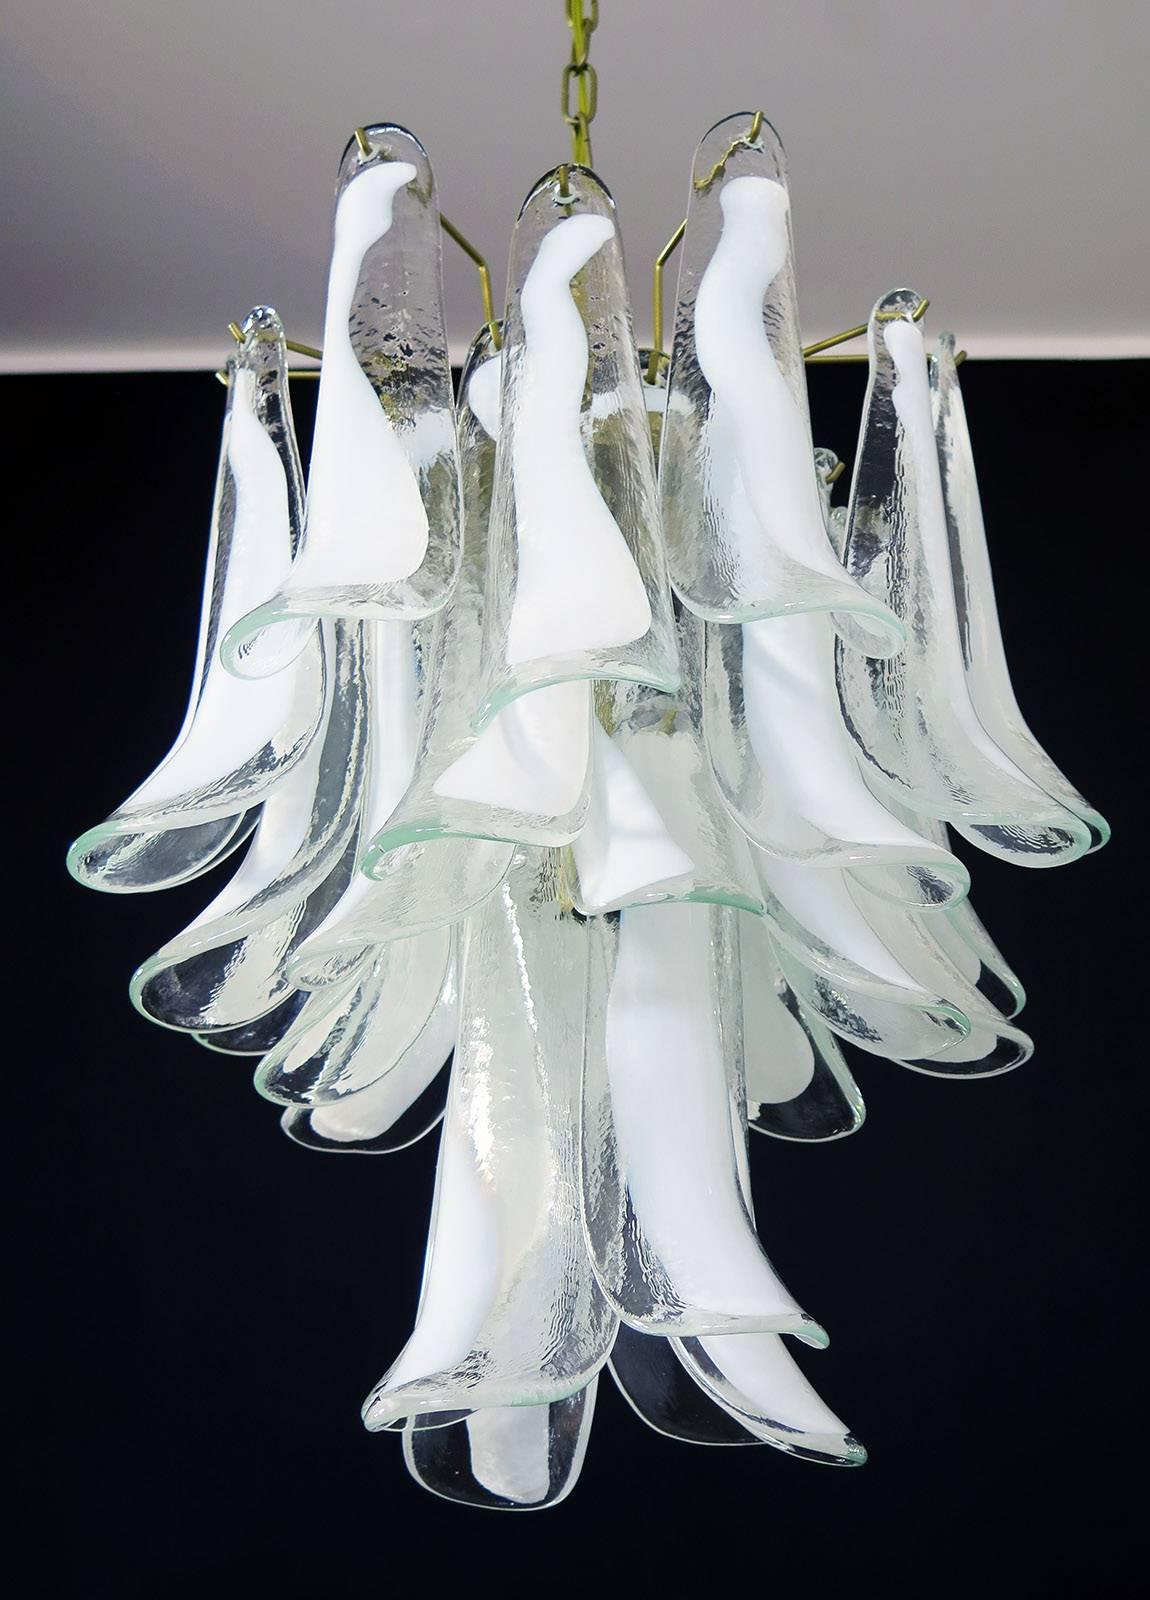 Huge Italian vintage Murano chandelier made by 30 glass petals (transparent and white “lattimo”) in a chrome frame.
Dimensions: 49,20 inches (125 cm) height with chain; 23,60 inches (60 cm) height without chain; 17,70 inches (45 cm)